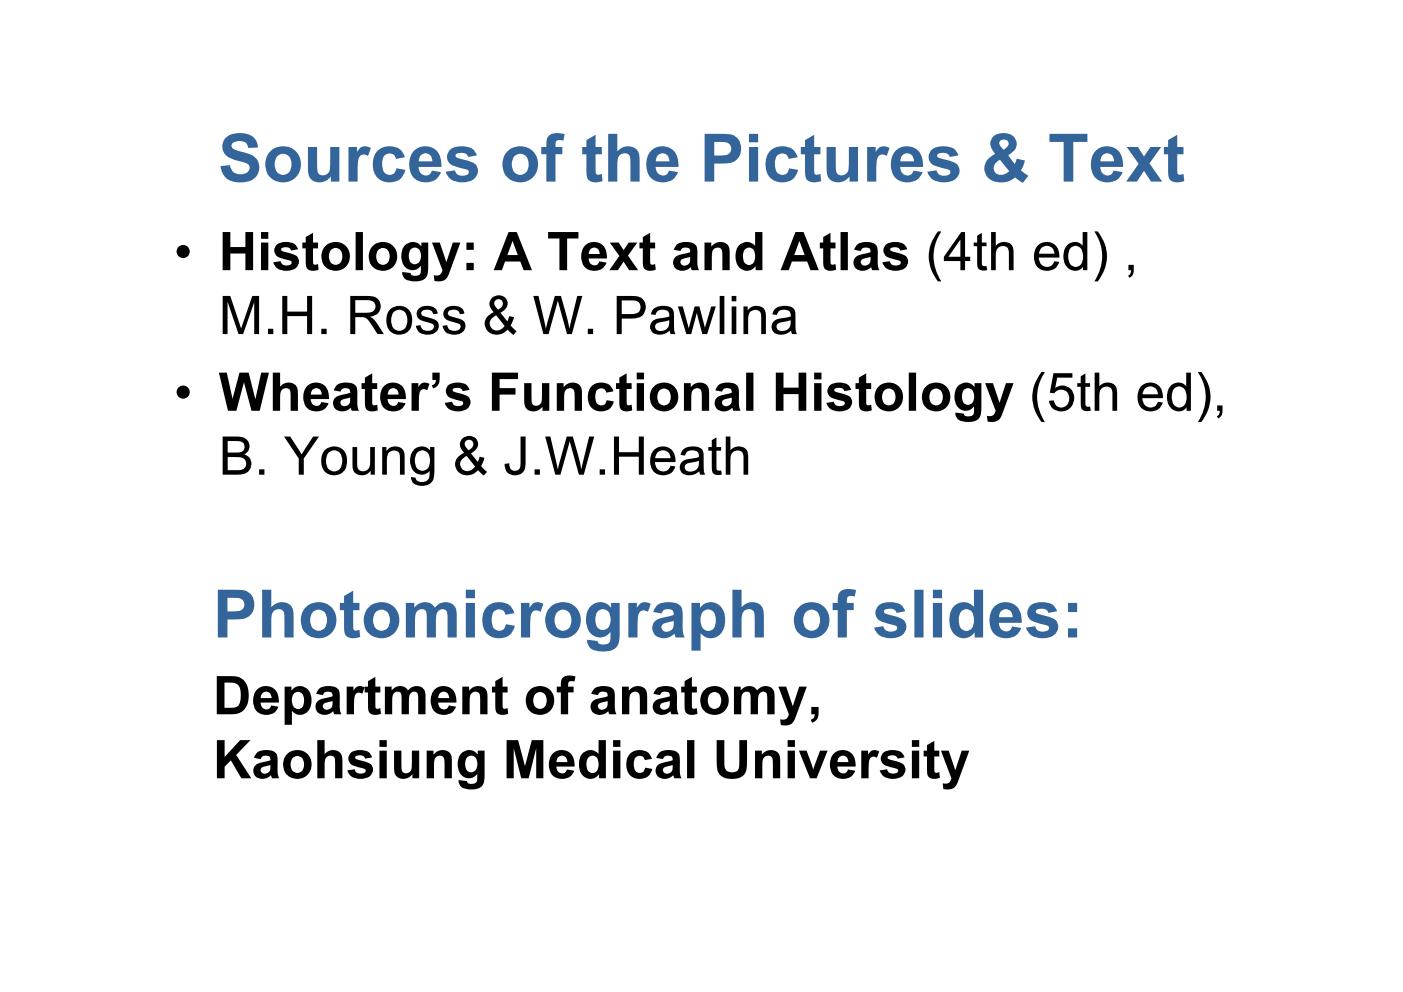 block8_02.jpg - Sources of the Pictures & Text¡E Histology: A Text and Atlas (4th ed) ,  M.H. Ross & W. Pawlina¡E Wheater's Functional Histology (5th ed),  B. Young & J.W.Heath Photomicrograph of slides: Department of anatomy, Kaohsiung Medical University